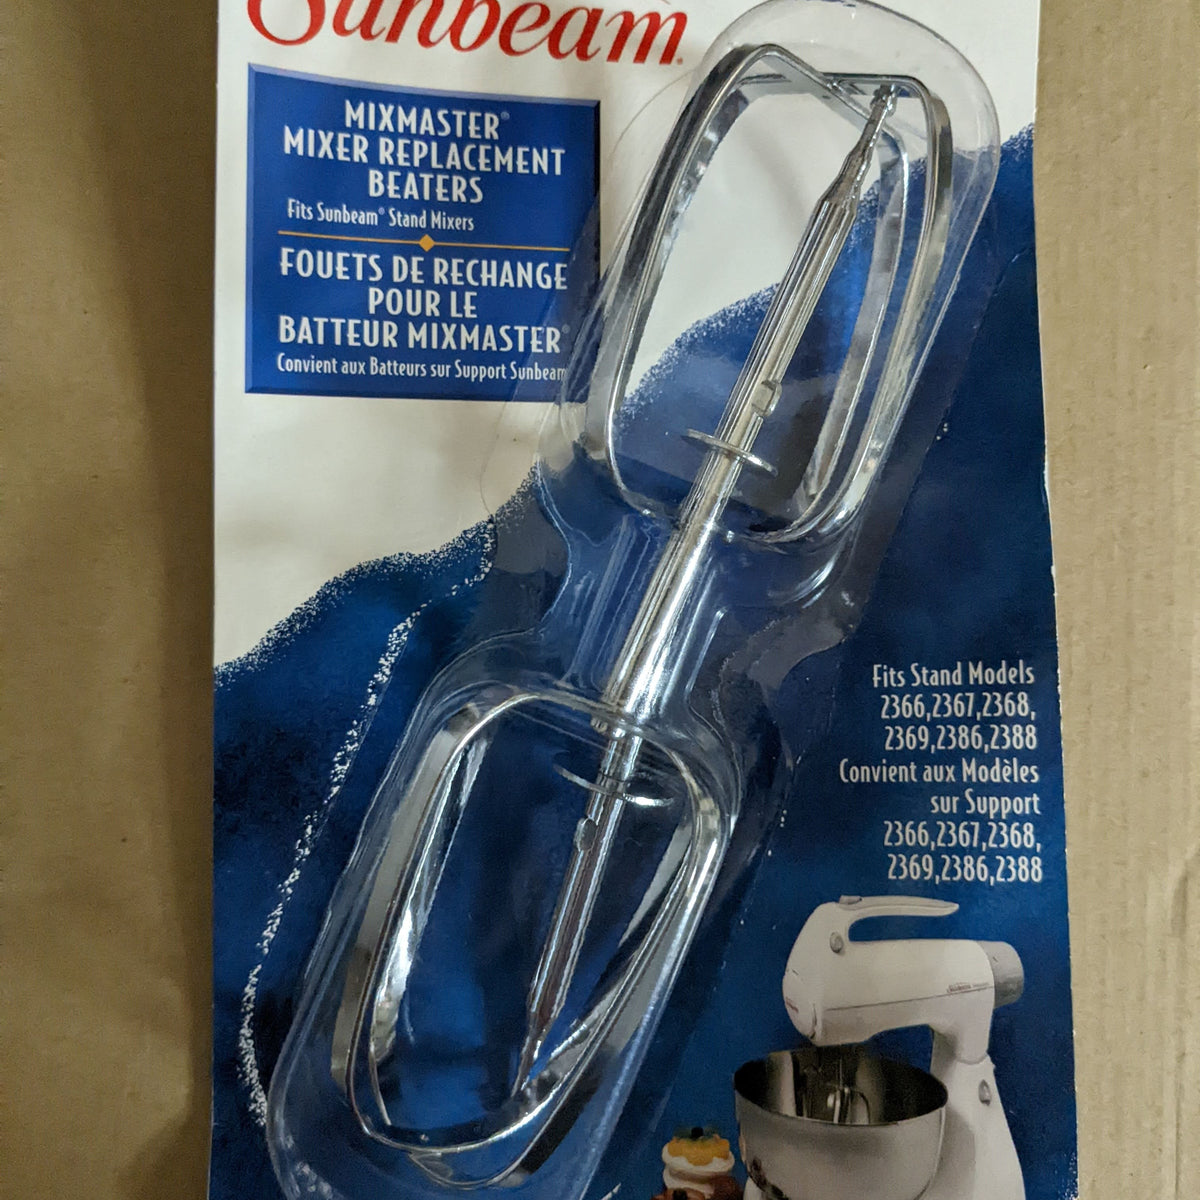 Sunbeam Mixmaster Stand Mixer Replacement Beaters - 004950000000